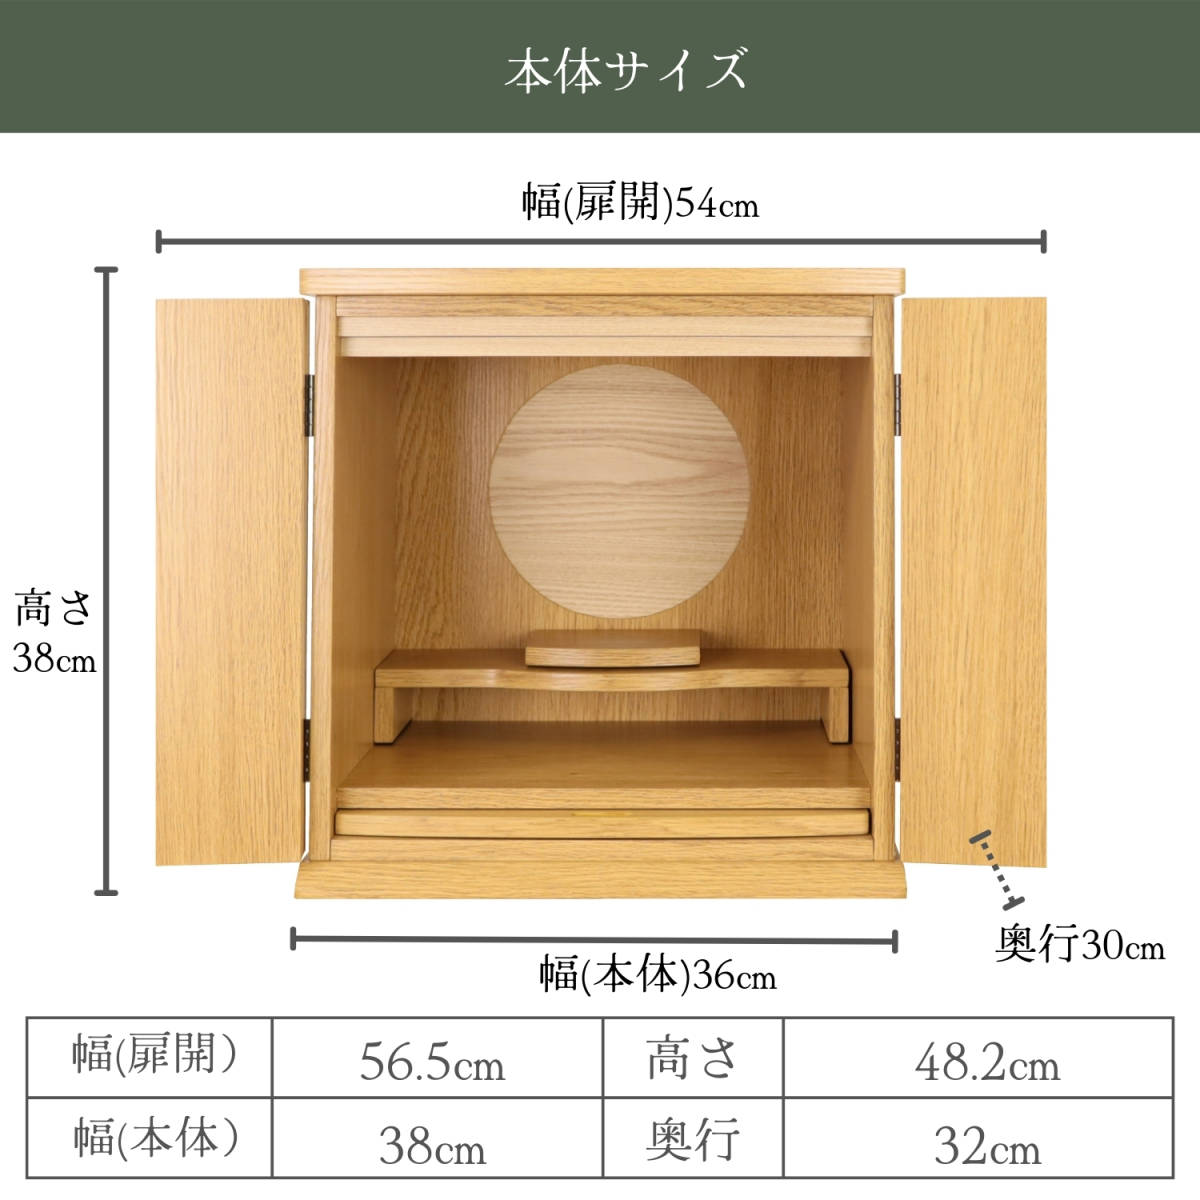  on put family Buddhist altar 13 number scoop net style walnut style depth 30. modern furniture style Mini family Buddhist altar compact 